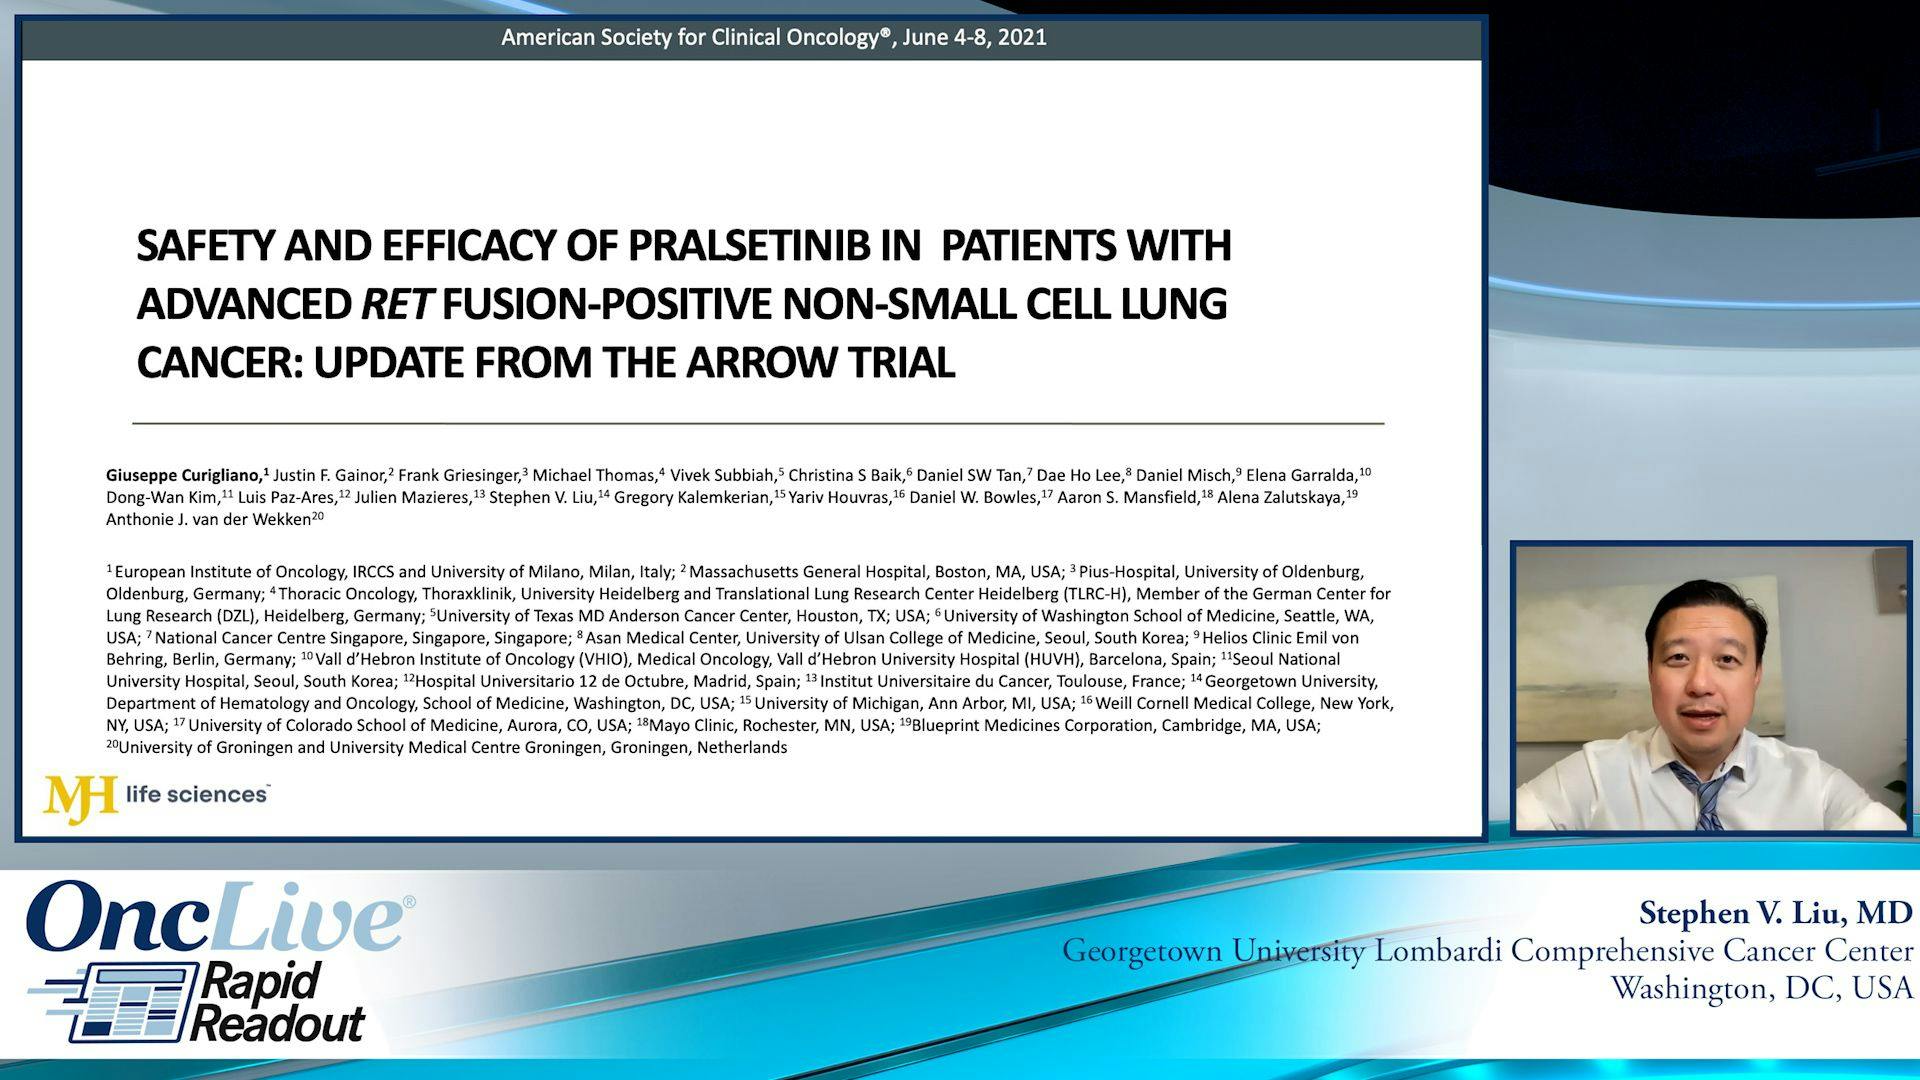 Rapid Readouts: Safety and Efficacy of Pralsetinib in Patients with Advanced RET Fusion-Positive Non-Small Cell Lung Cancer: Update from the ARROW trial